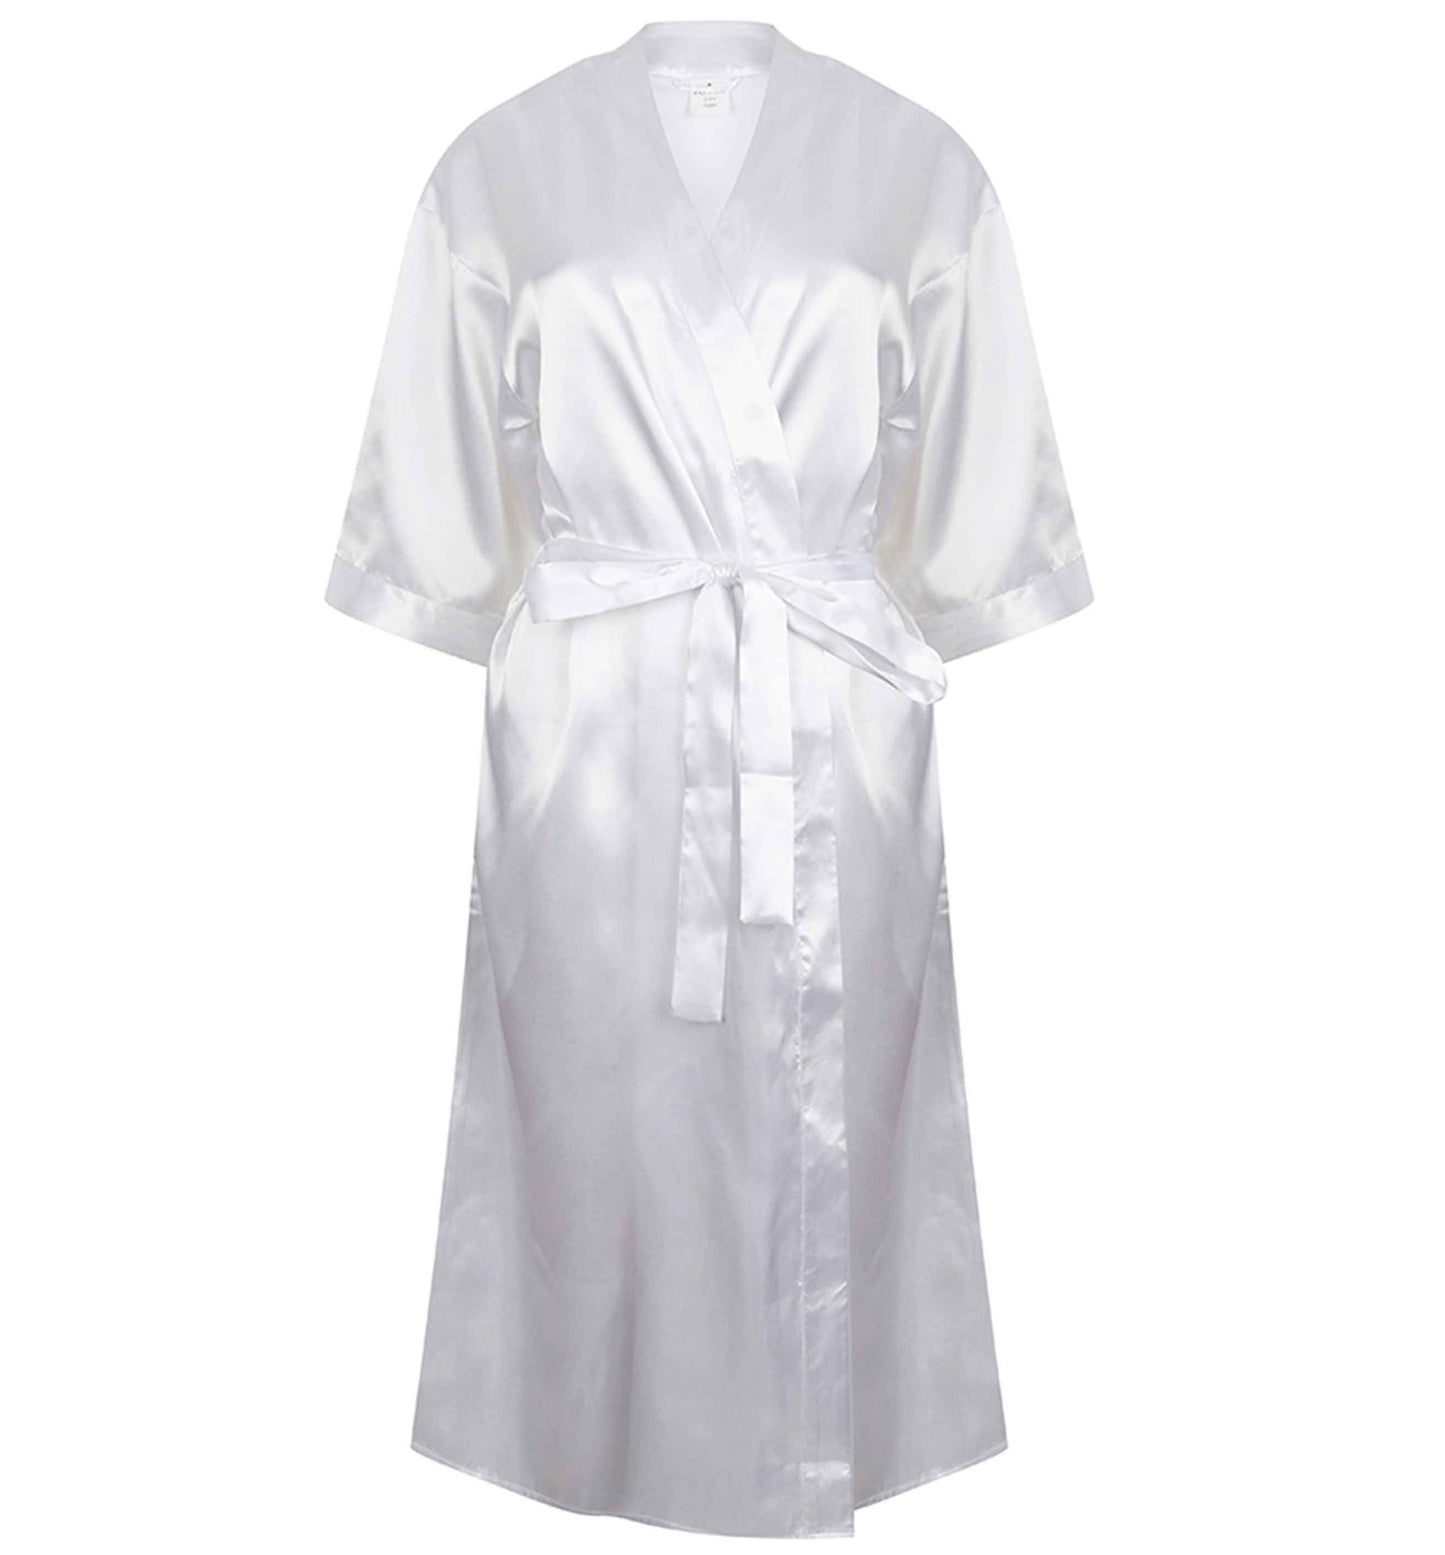 Happiness is gin | 8-18 | Kimono style satin robe | Ladies dressing gown